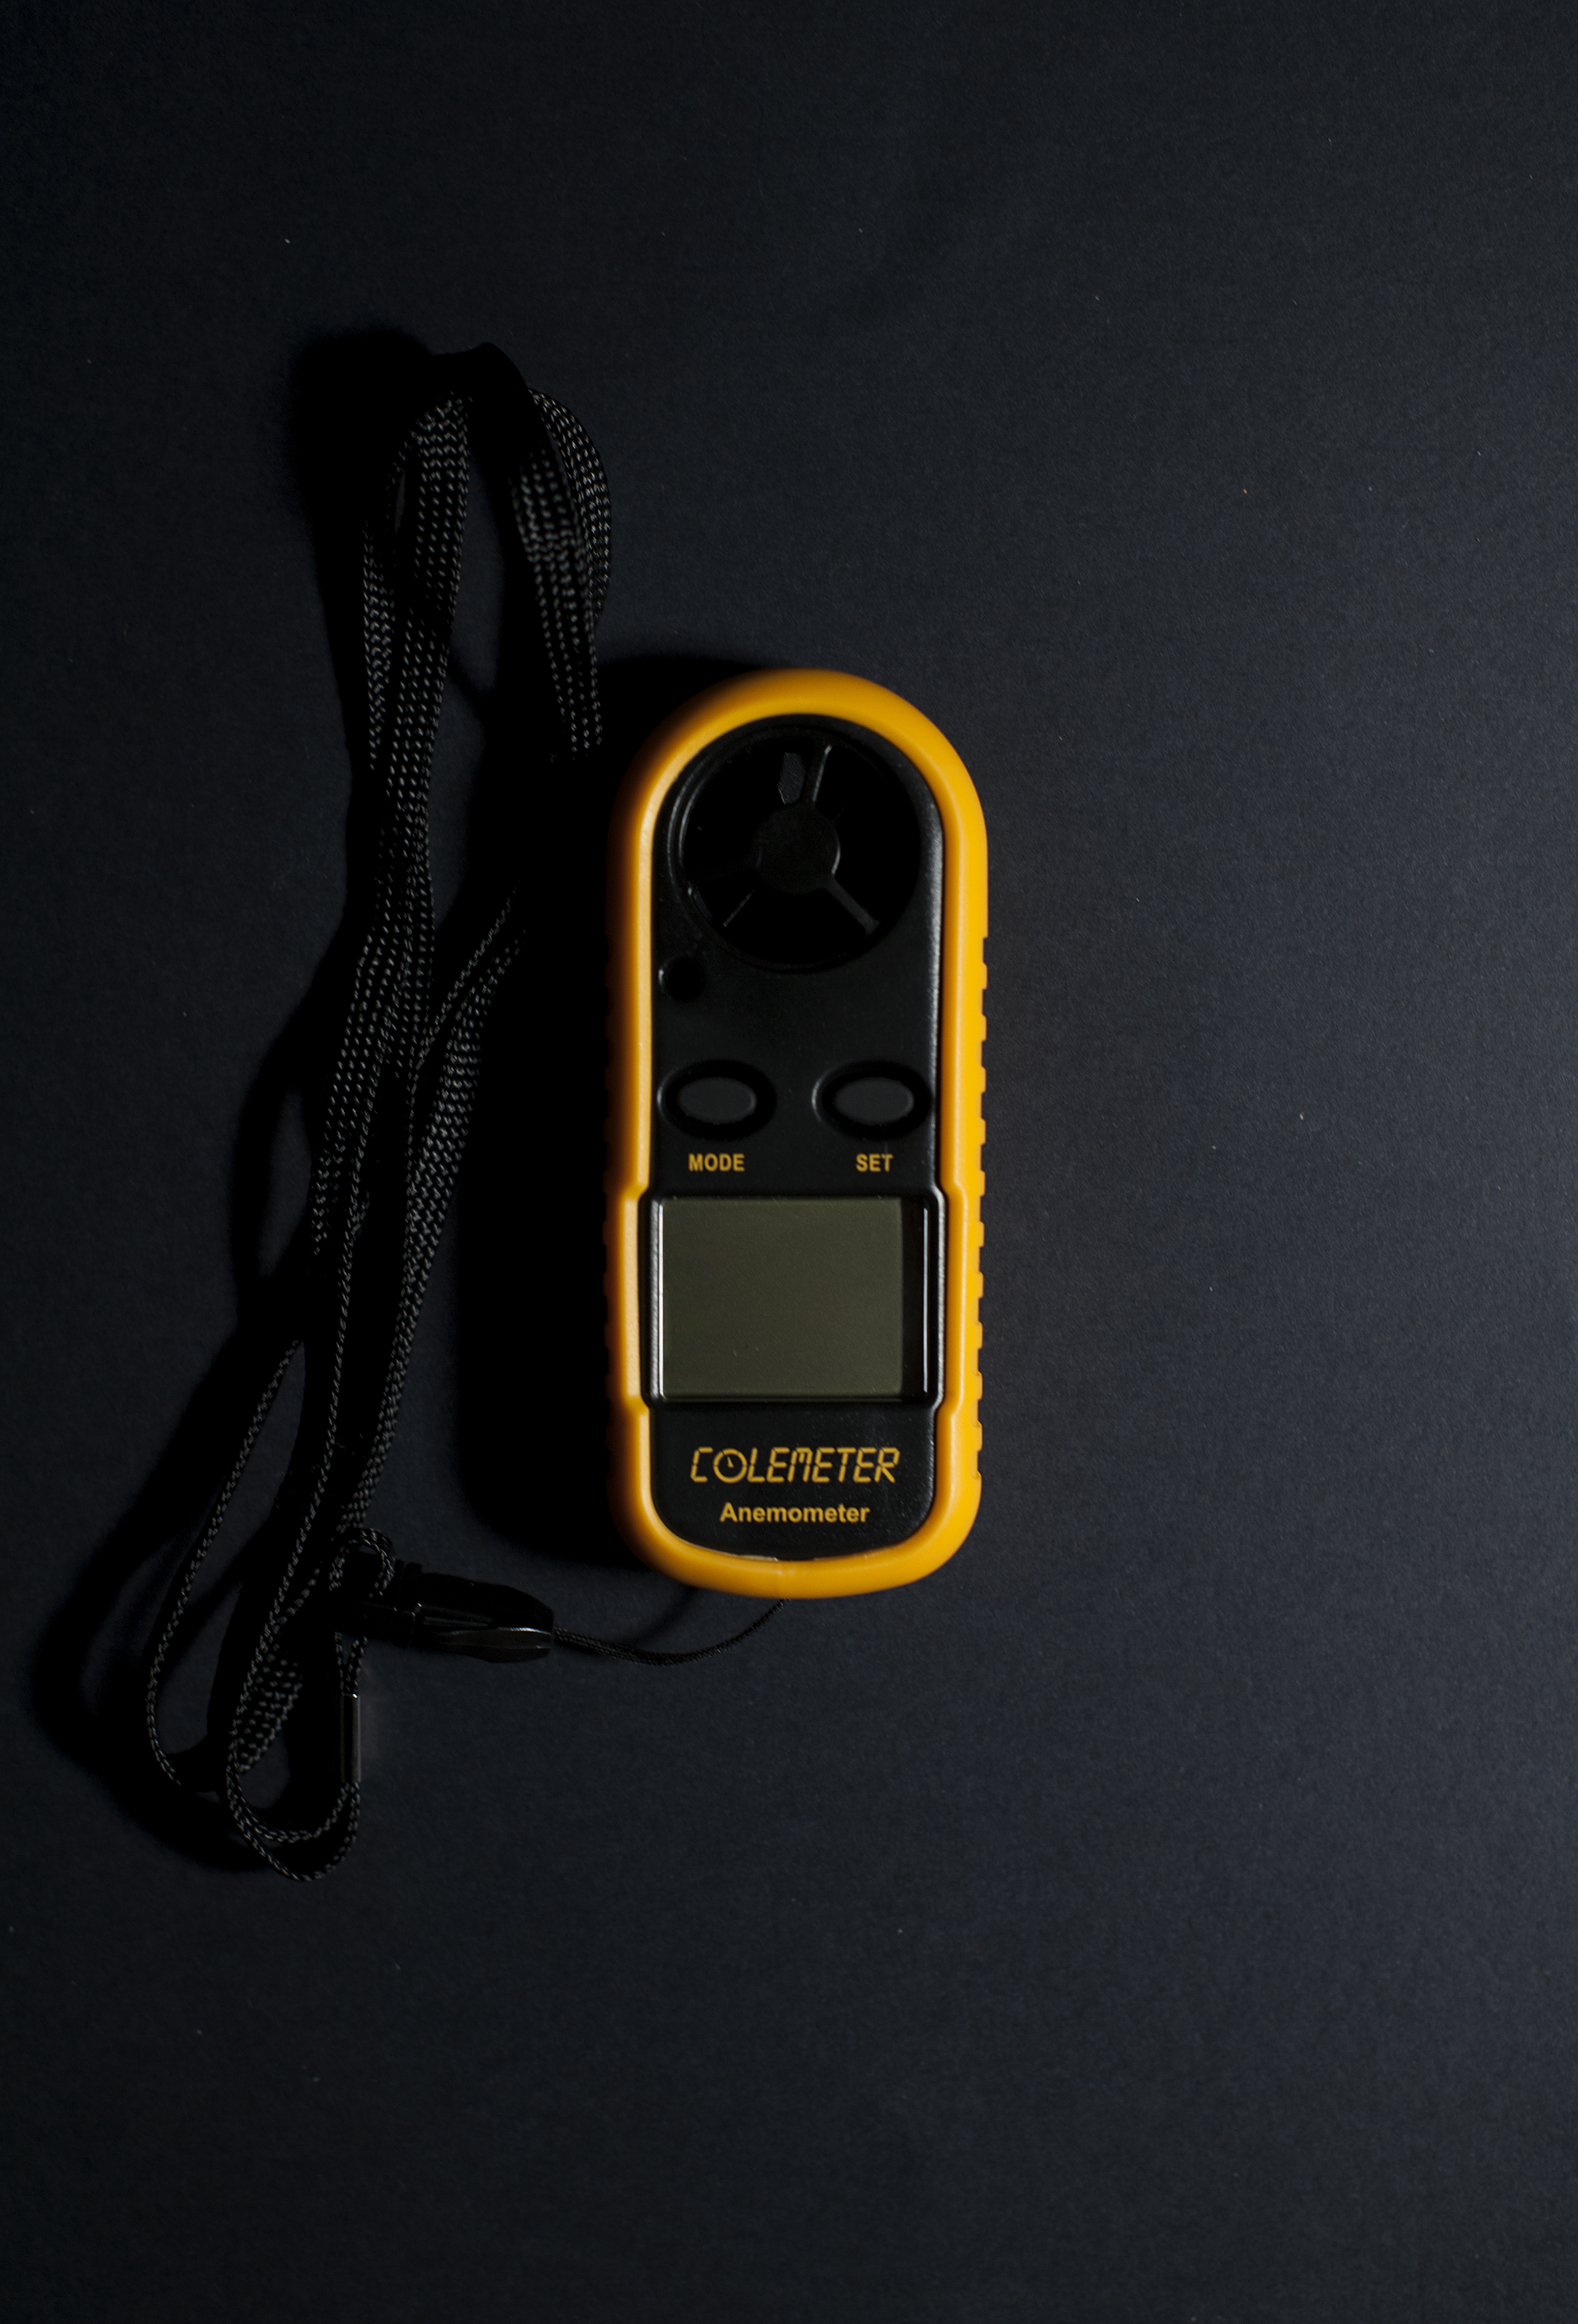 An anomometer, also called an airflow meter or wind speed meter, is a meteorological tool that tracks currents through a room for documentation and mapping of your ghost hunting location. The natural movement of air in a room can be calculated.